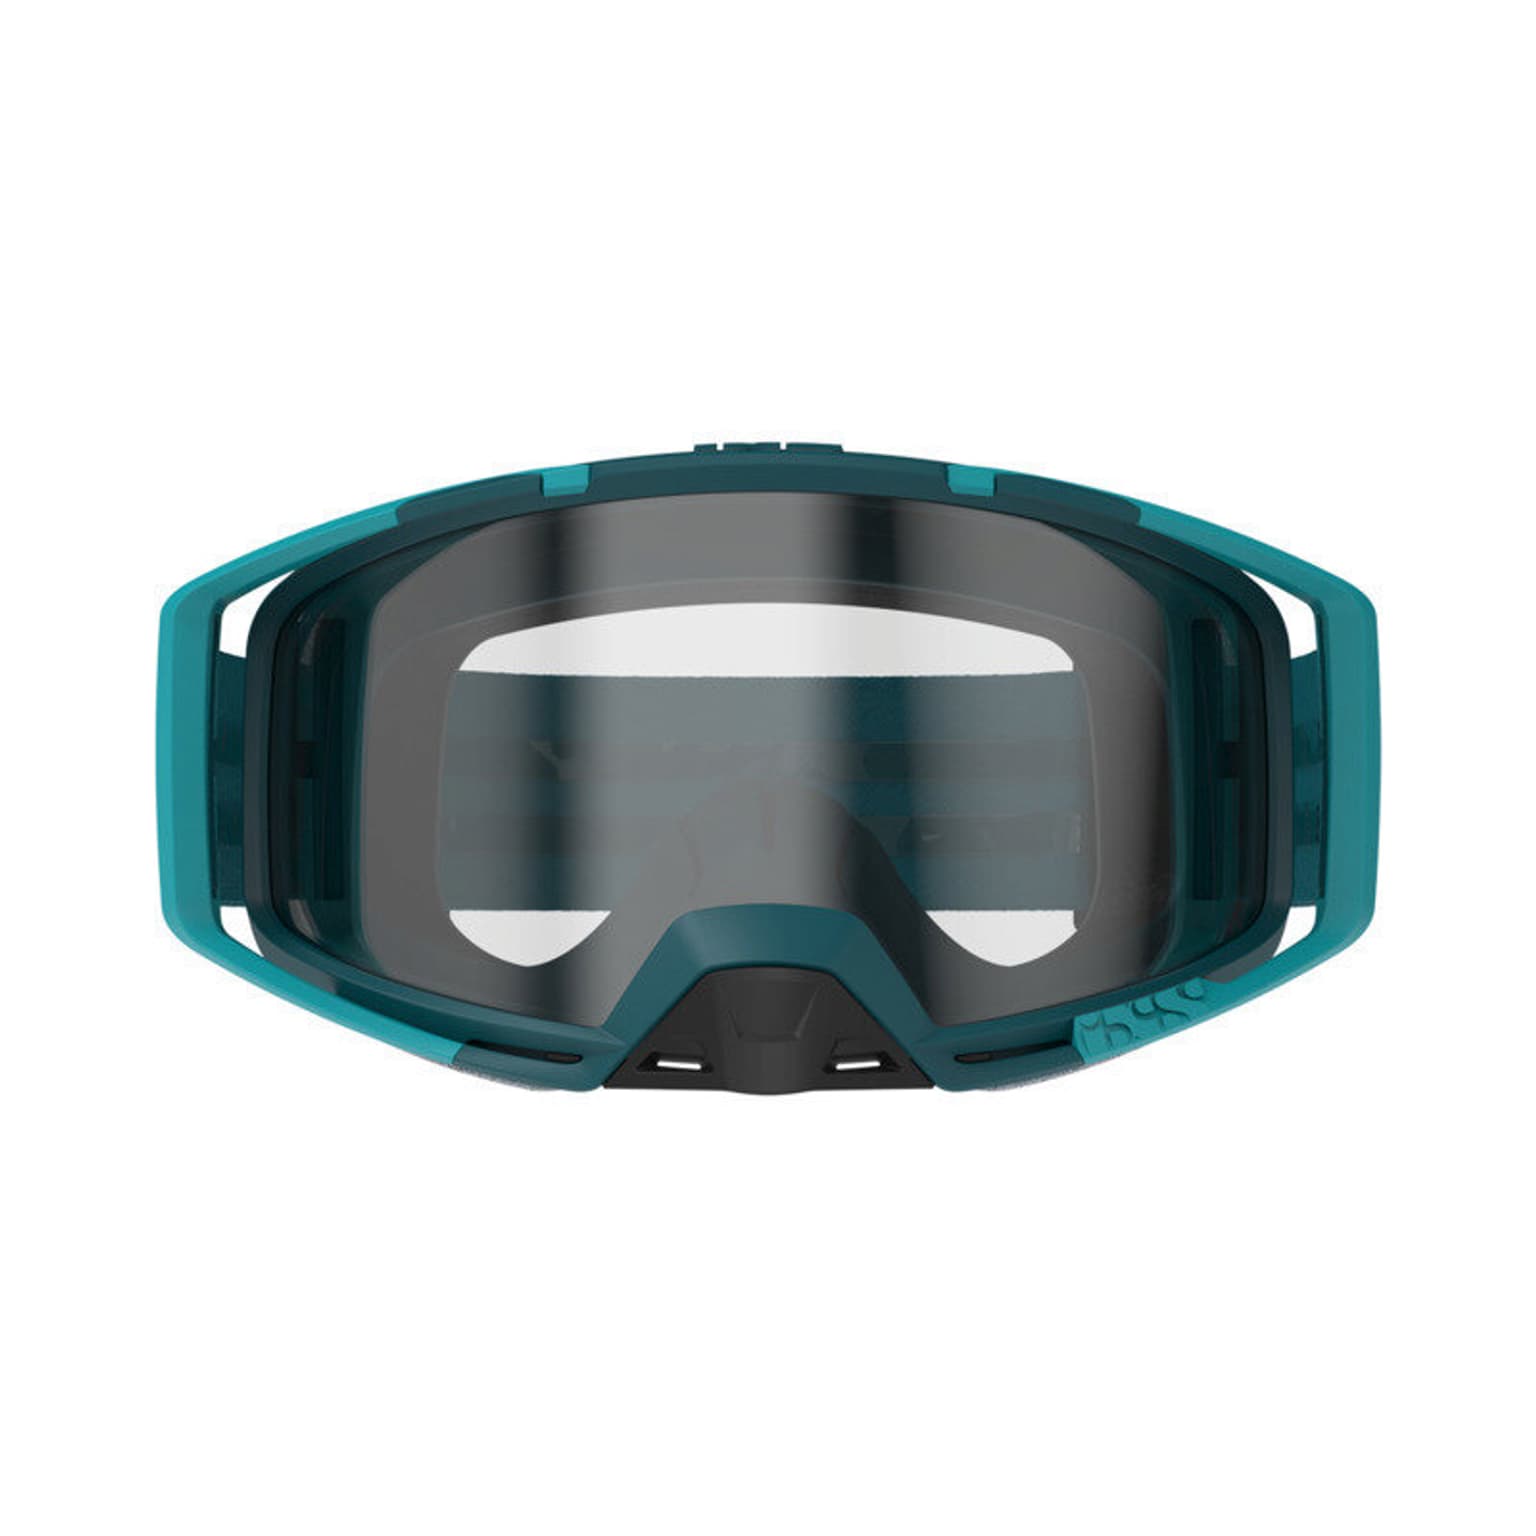 iXS iXS Trigger clear Lunettes VTT turquoise 2